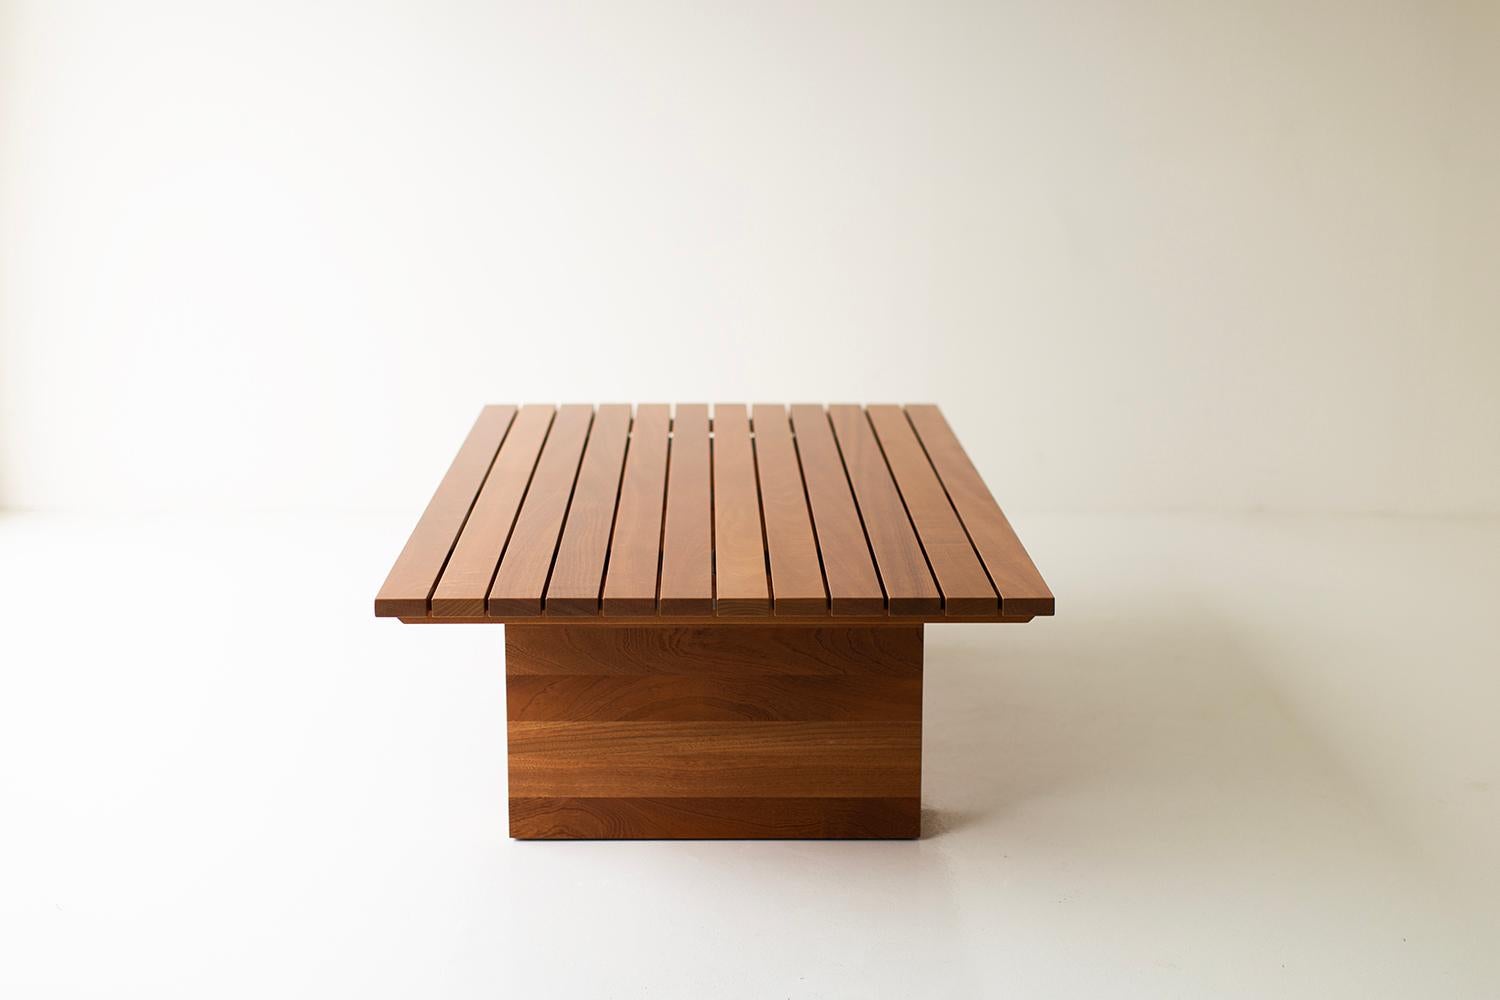 Hand-Crafted Bertu Coffee Table, Outdoor Wood Coffee Table, Coffee Table, Suelo For Sale